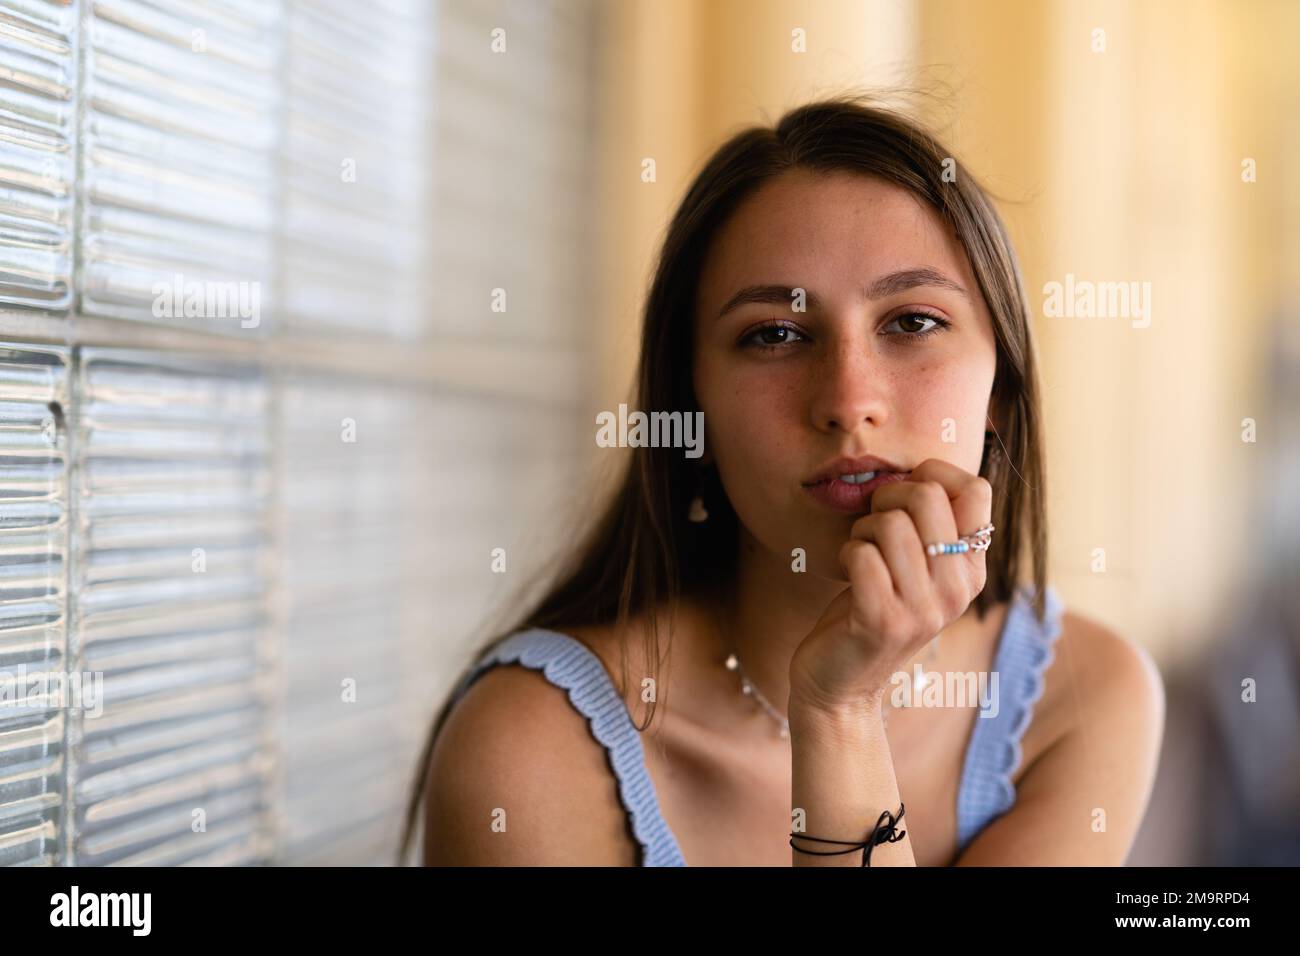 Close Up Portrait of Fashionable Teenage Age Girl Wearing Handmade Jewelry Waiting at a Train Station Stock Photo